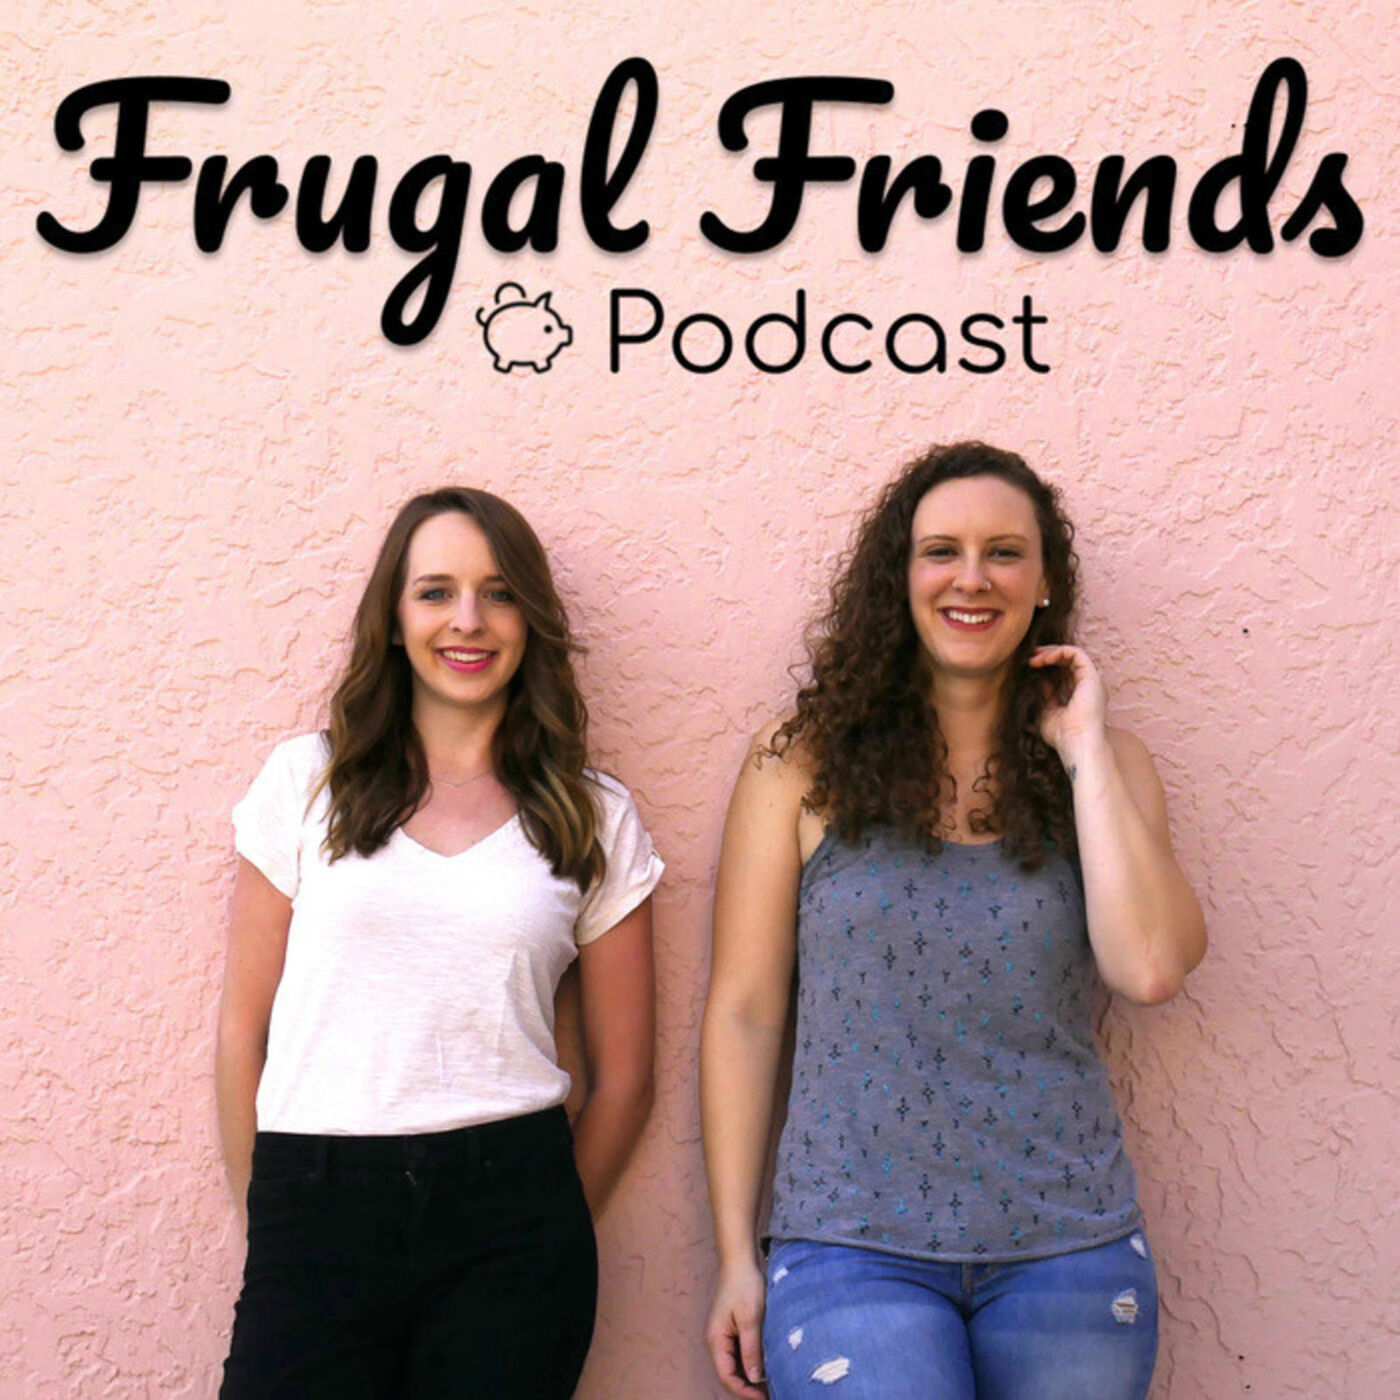 Building a Frugal Culture in Your Community